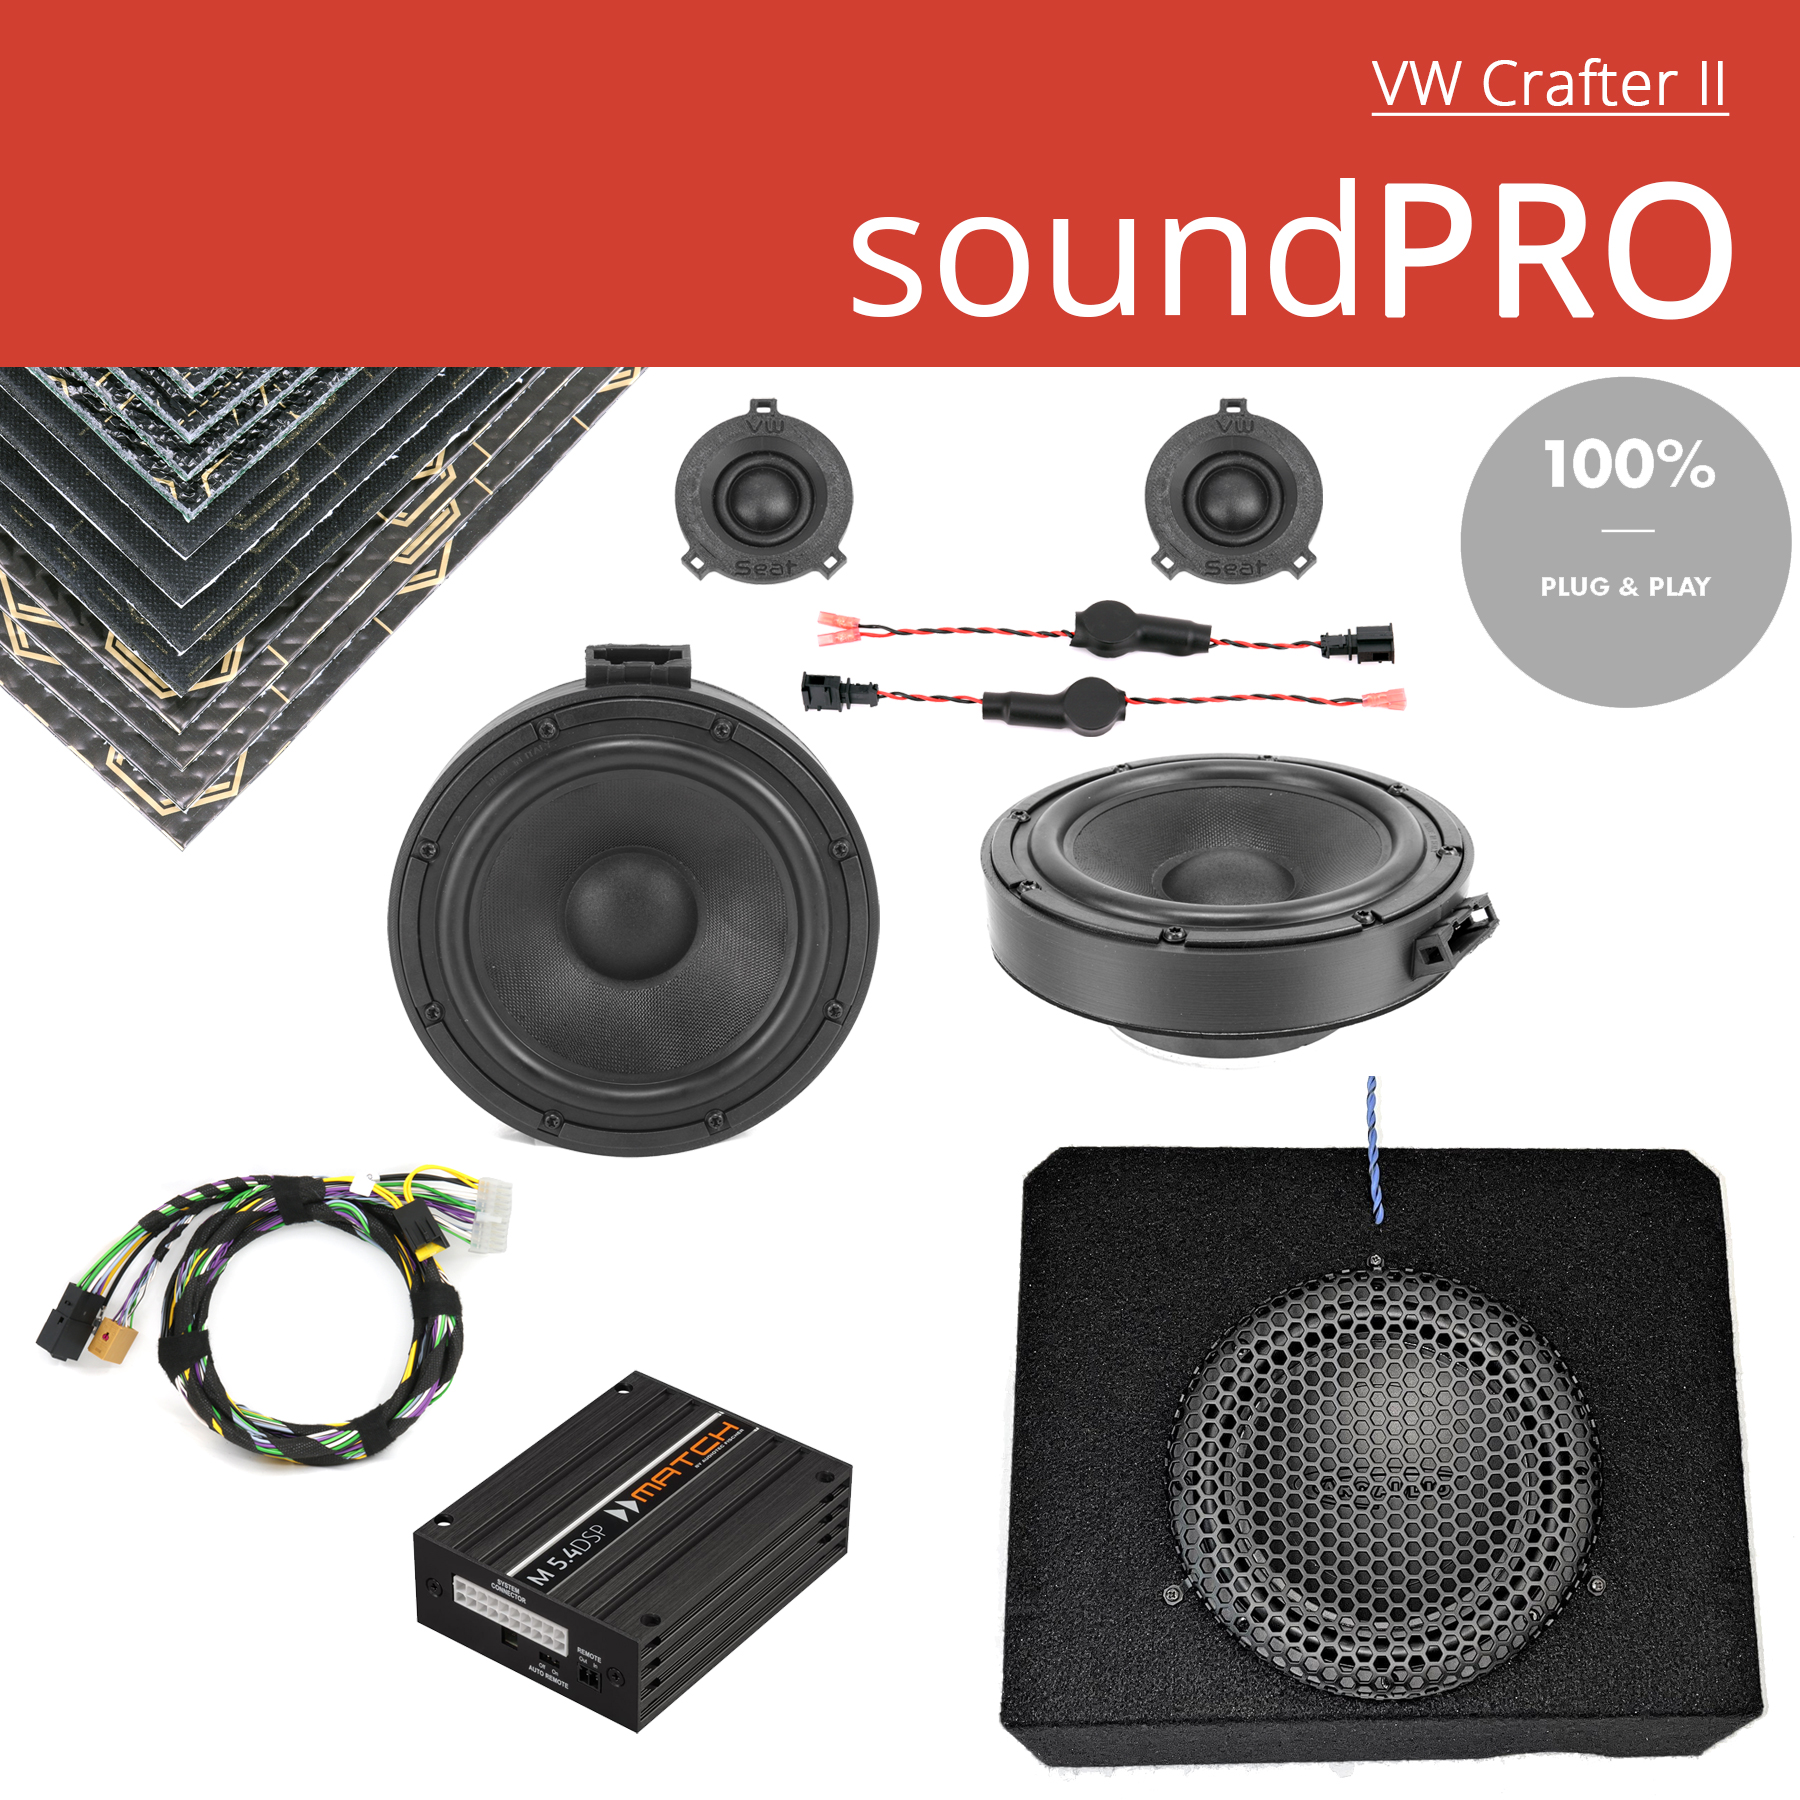 soundPRO VW Crafter II